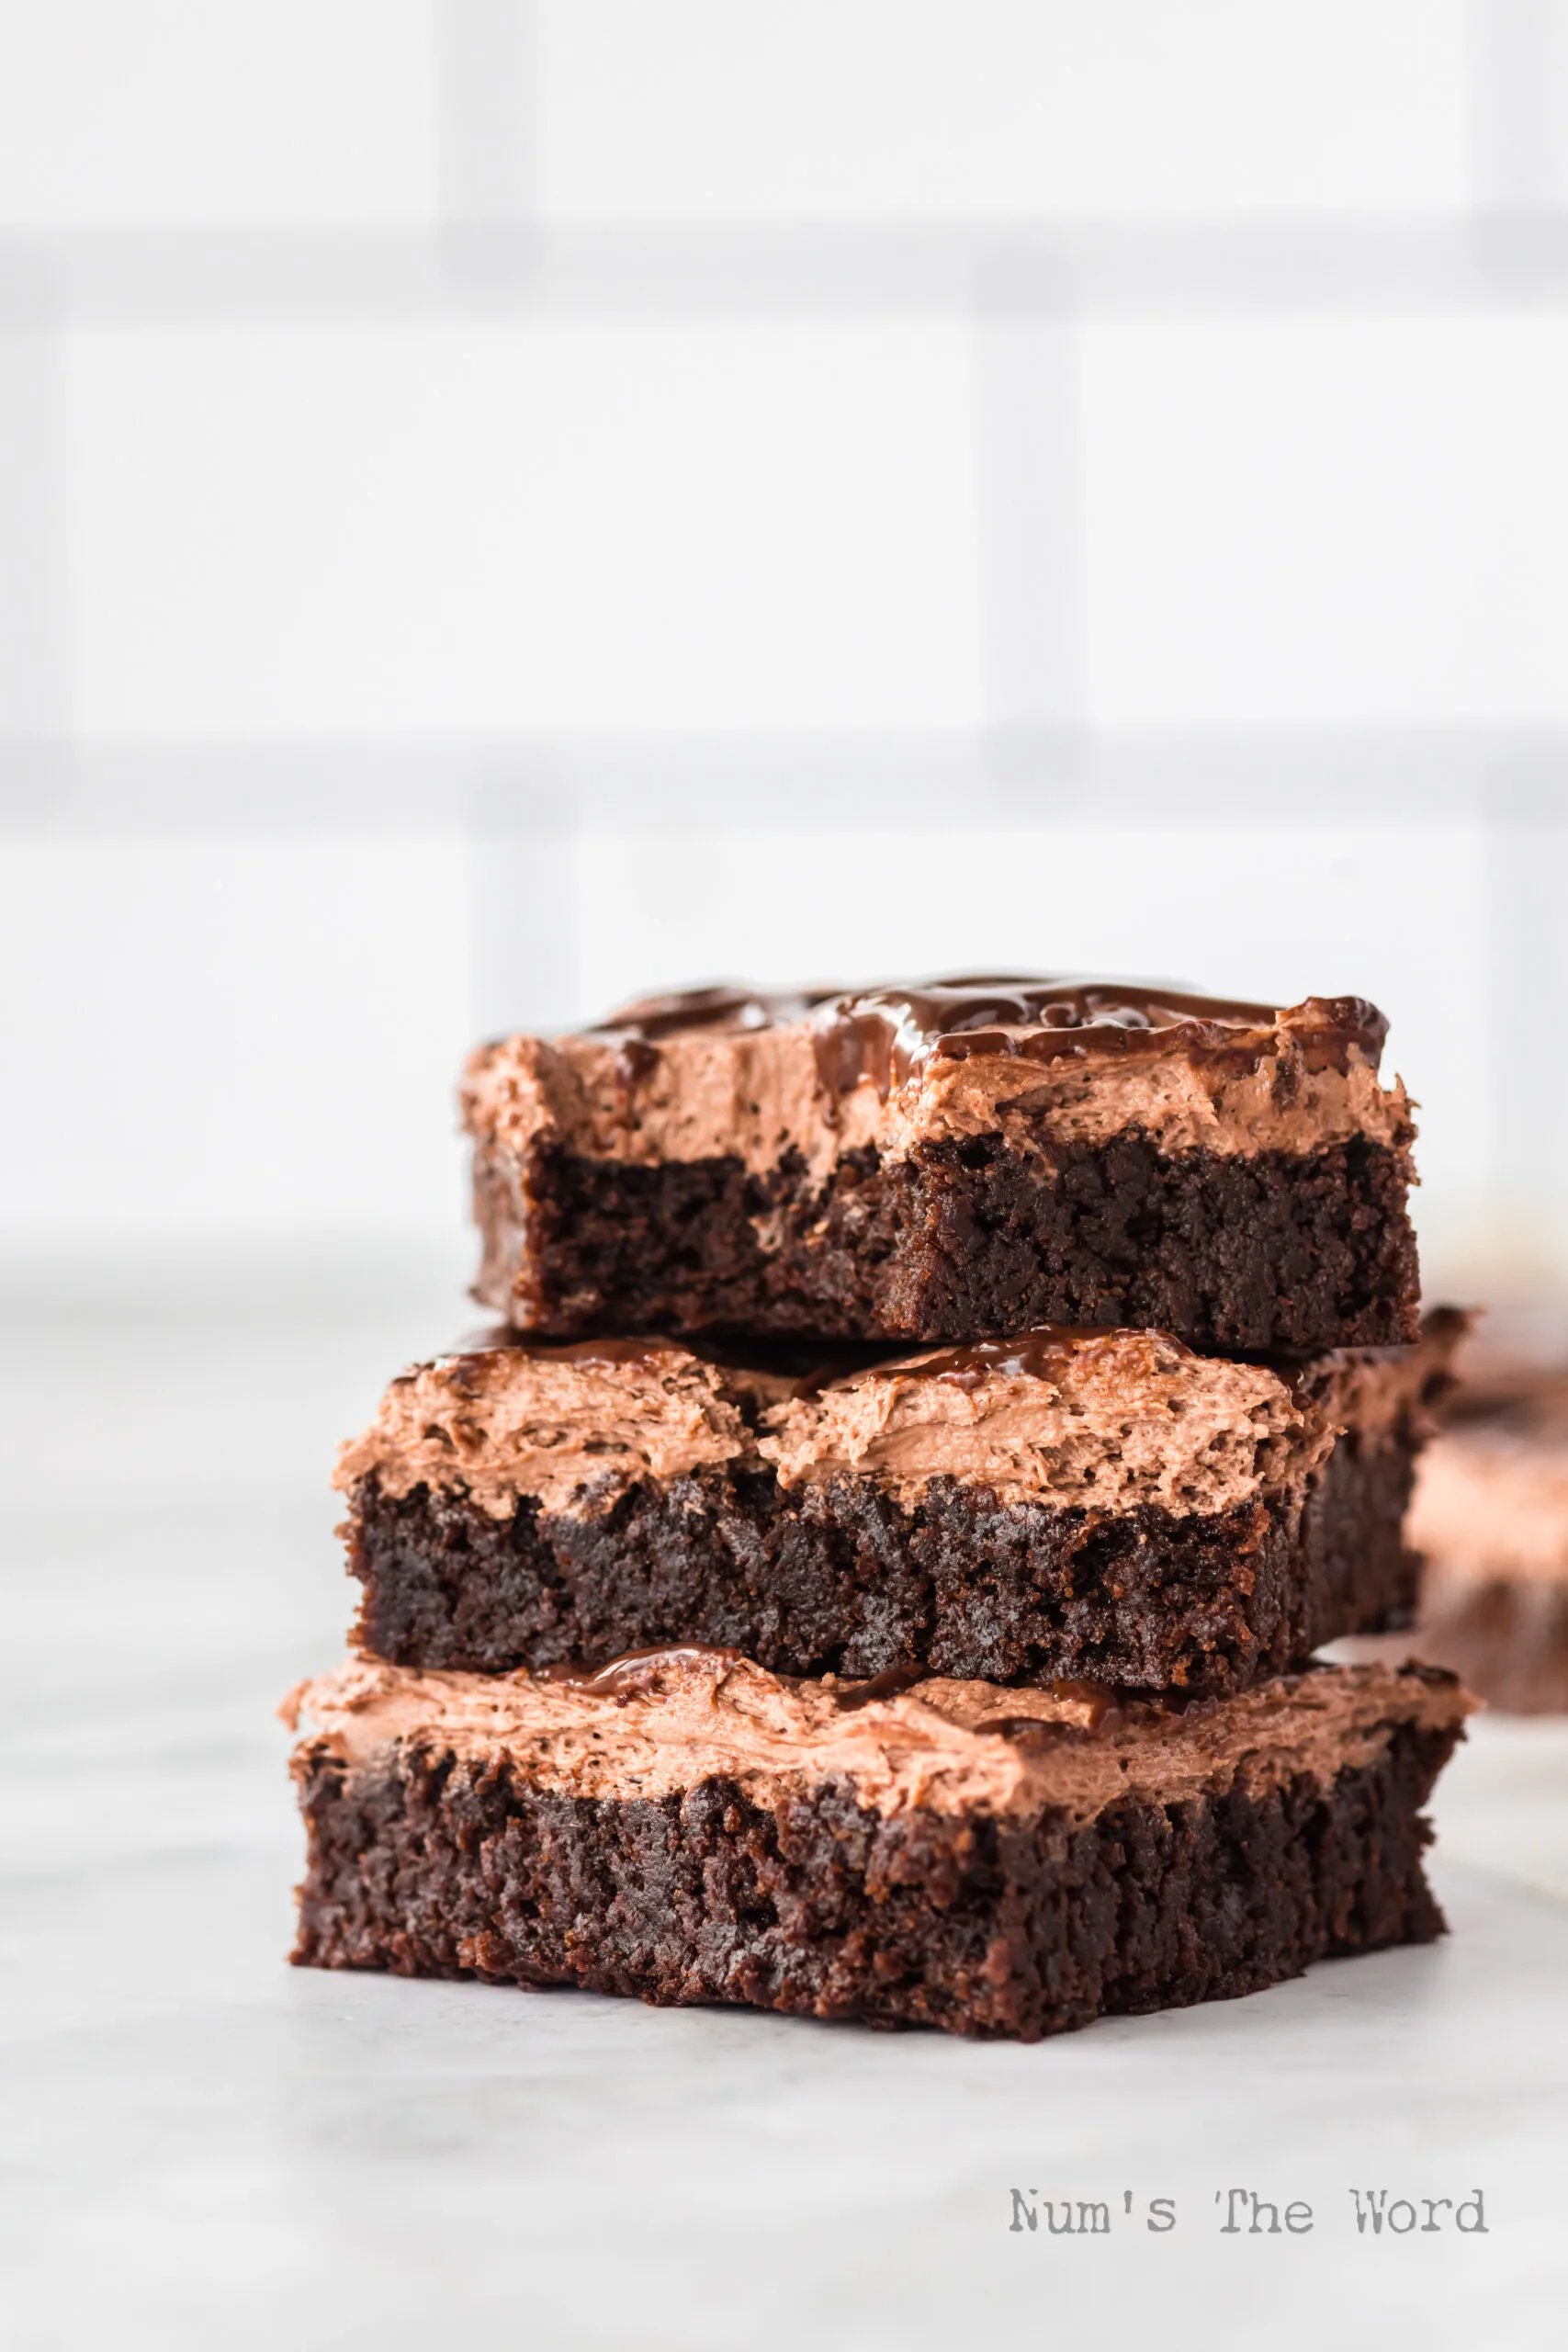 side view of 3 brownies stacked on top of each other. The top brownie has a bite removed.